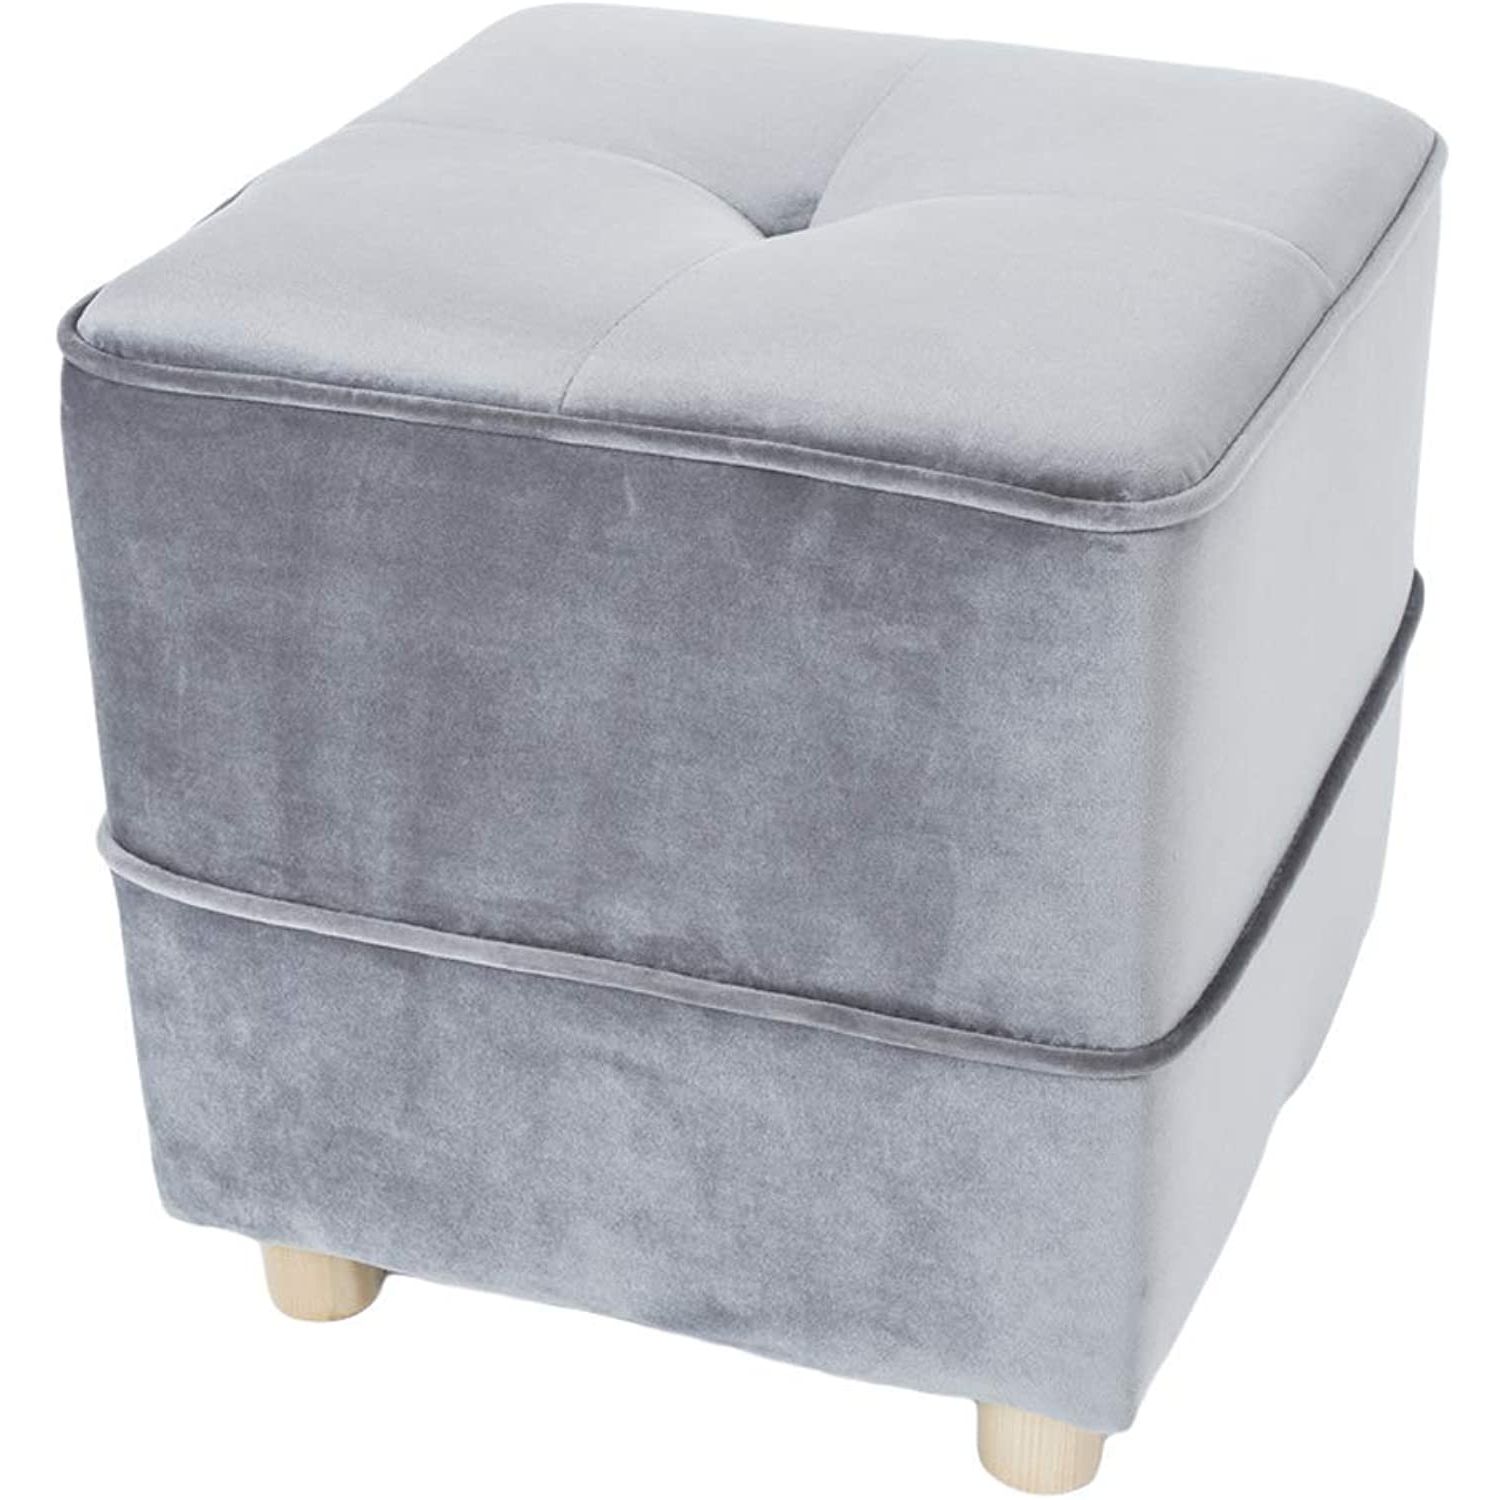 Gray And Beige Solid Cube Pouf Ottomans With Regard To Most Up To Date Nmdcdh Footstool Ottoman,square Cube Footrest Tufted Upholstered Velvet (View 7 of 10)